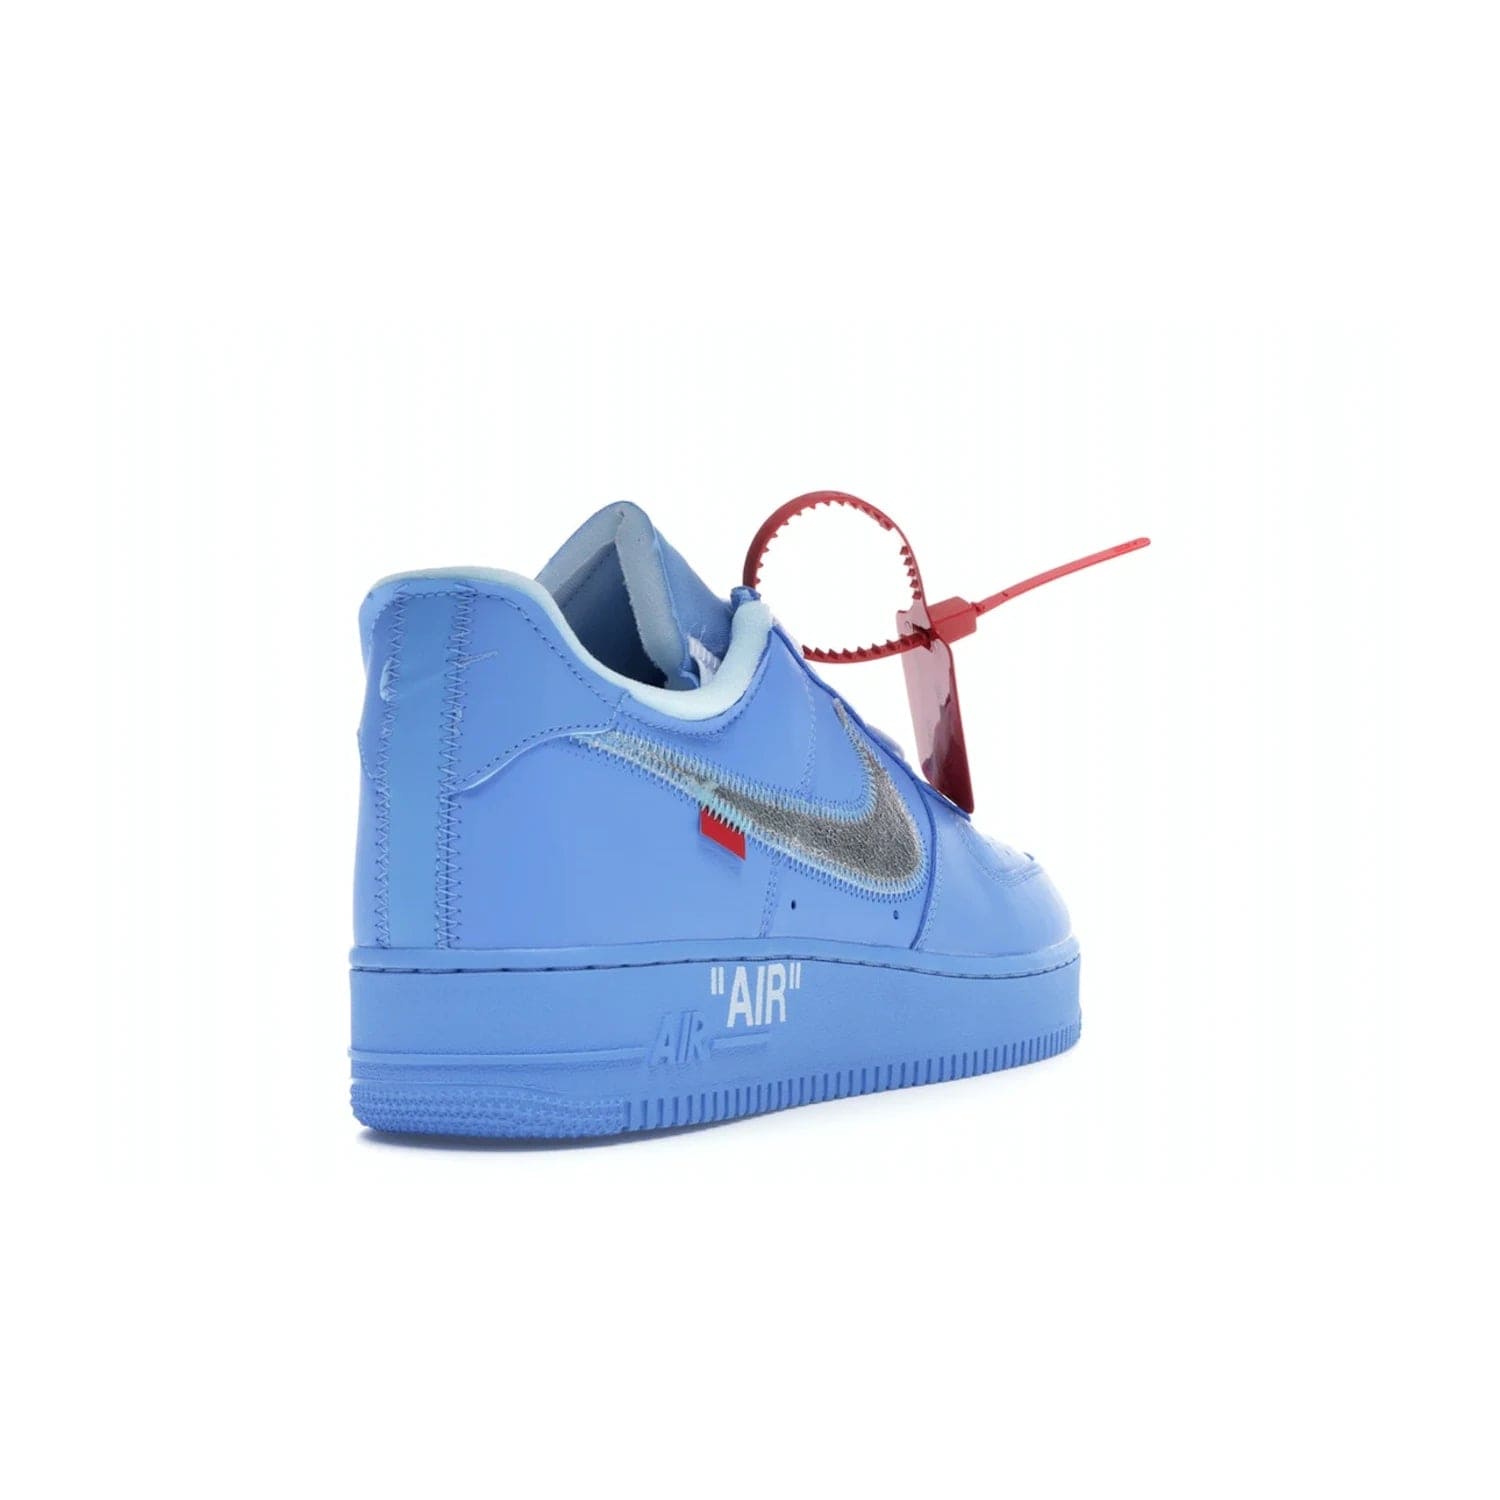 Nike Air Force 1 Low Off-White MCA University Blue - Image 31 - Only at www.BallersClubKickz.com - Virgil Abloh's Air Force 1 Low Off-White MCA University Blue: Features University Blue leather and midsole, reflective silver Nike Swoosh, red zip tie, white laces, and iconic Off-White™ branding. A must-have for any Virgil Abloh enthusiast.